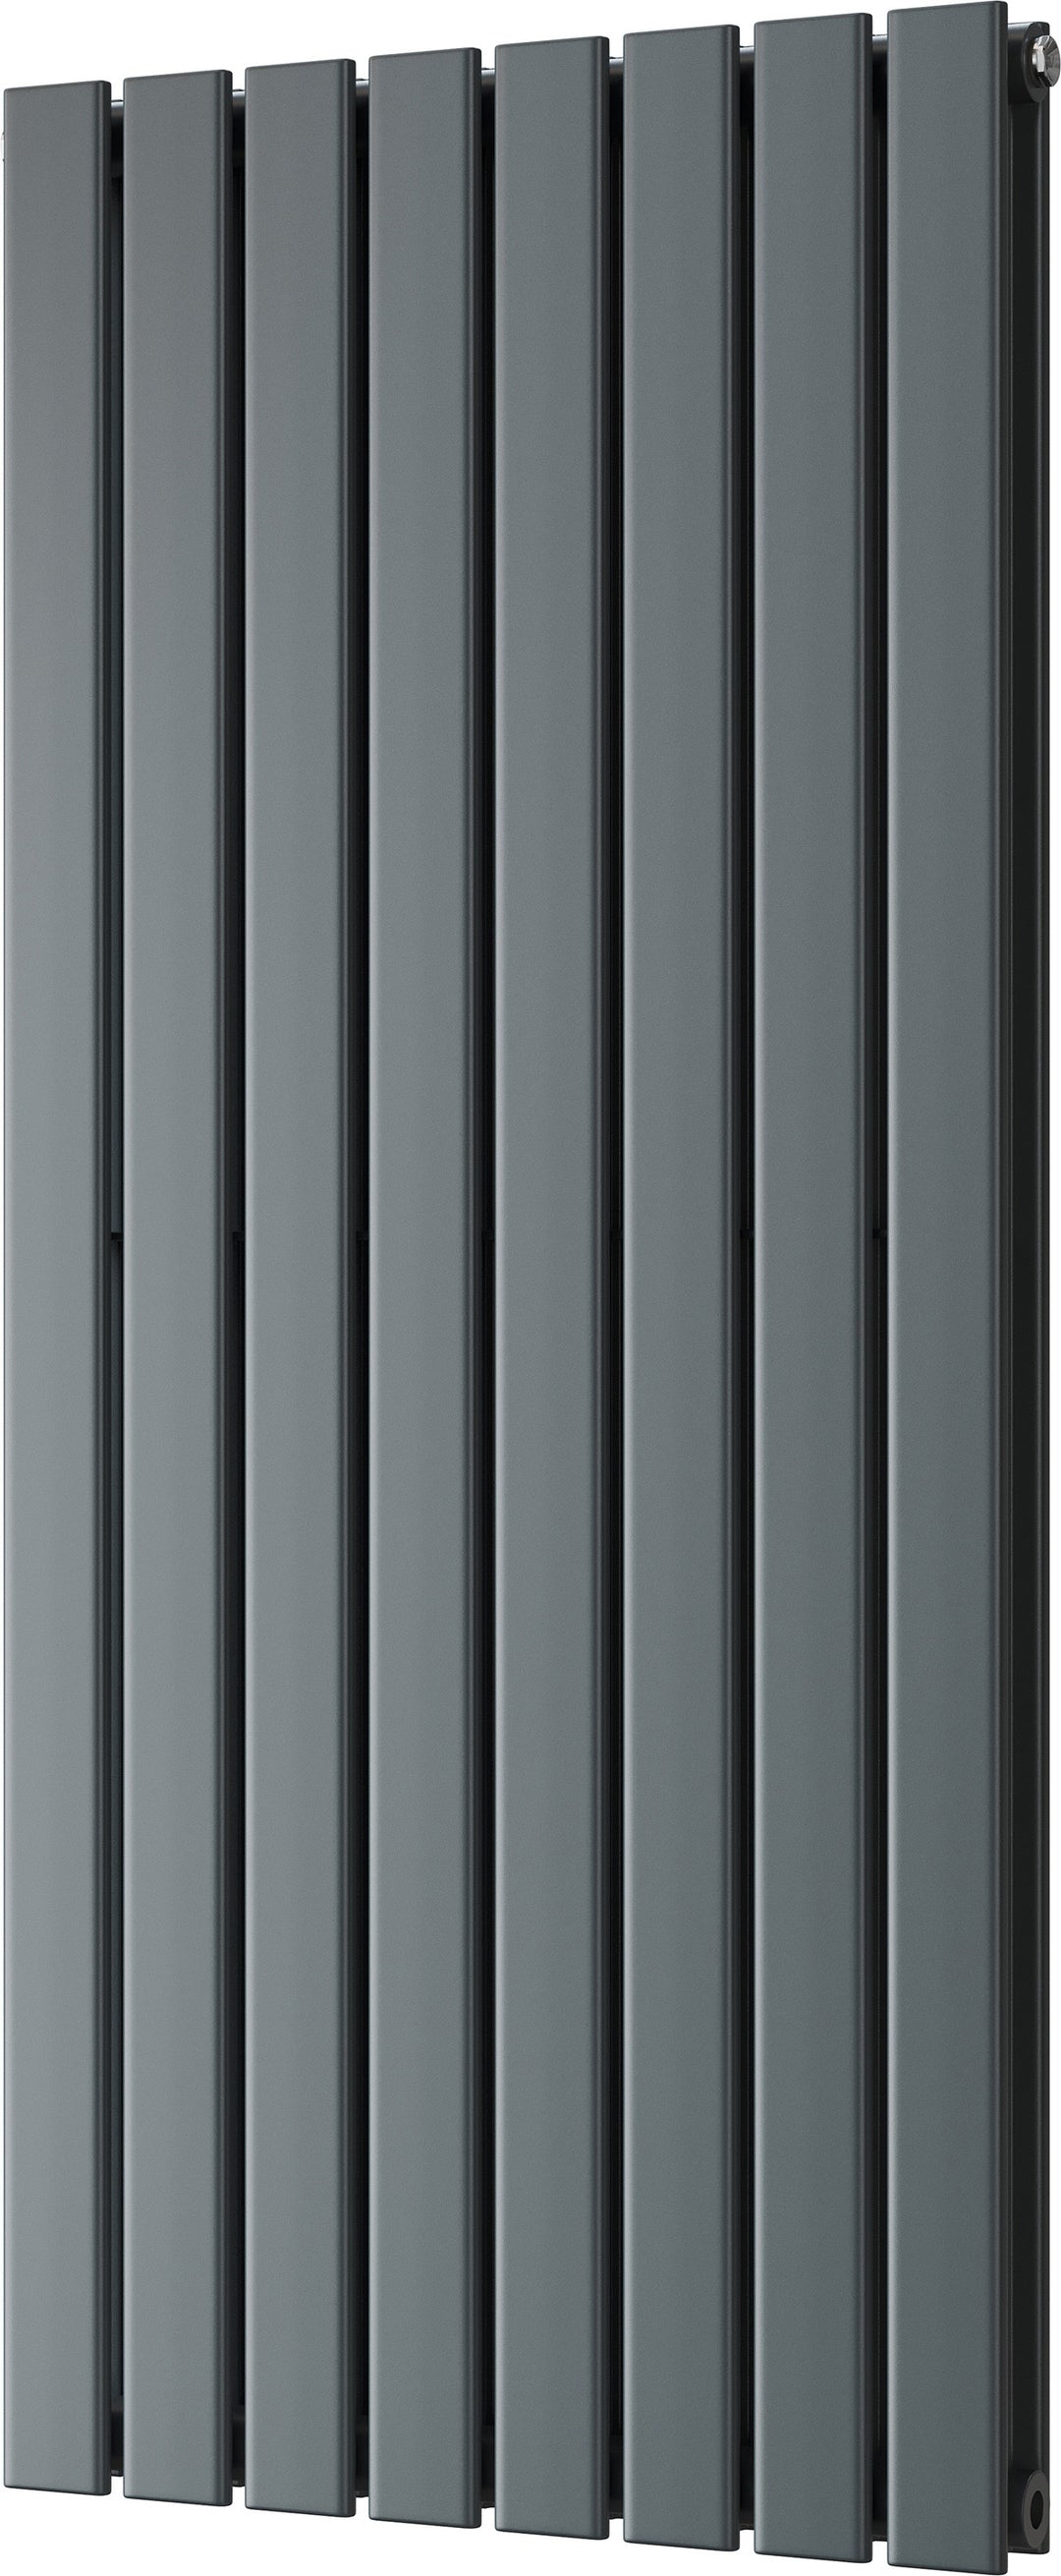 Typhoon - Anthracite Vertical Radiator H1200mm x W544mm Double Panel